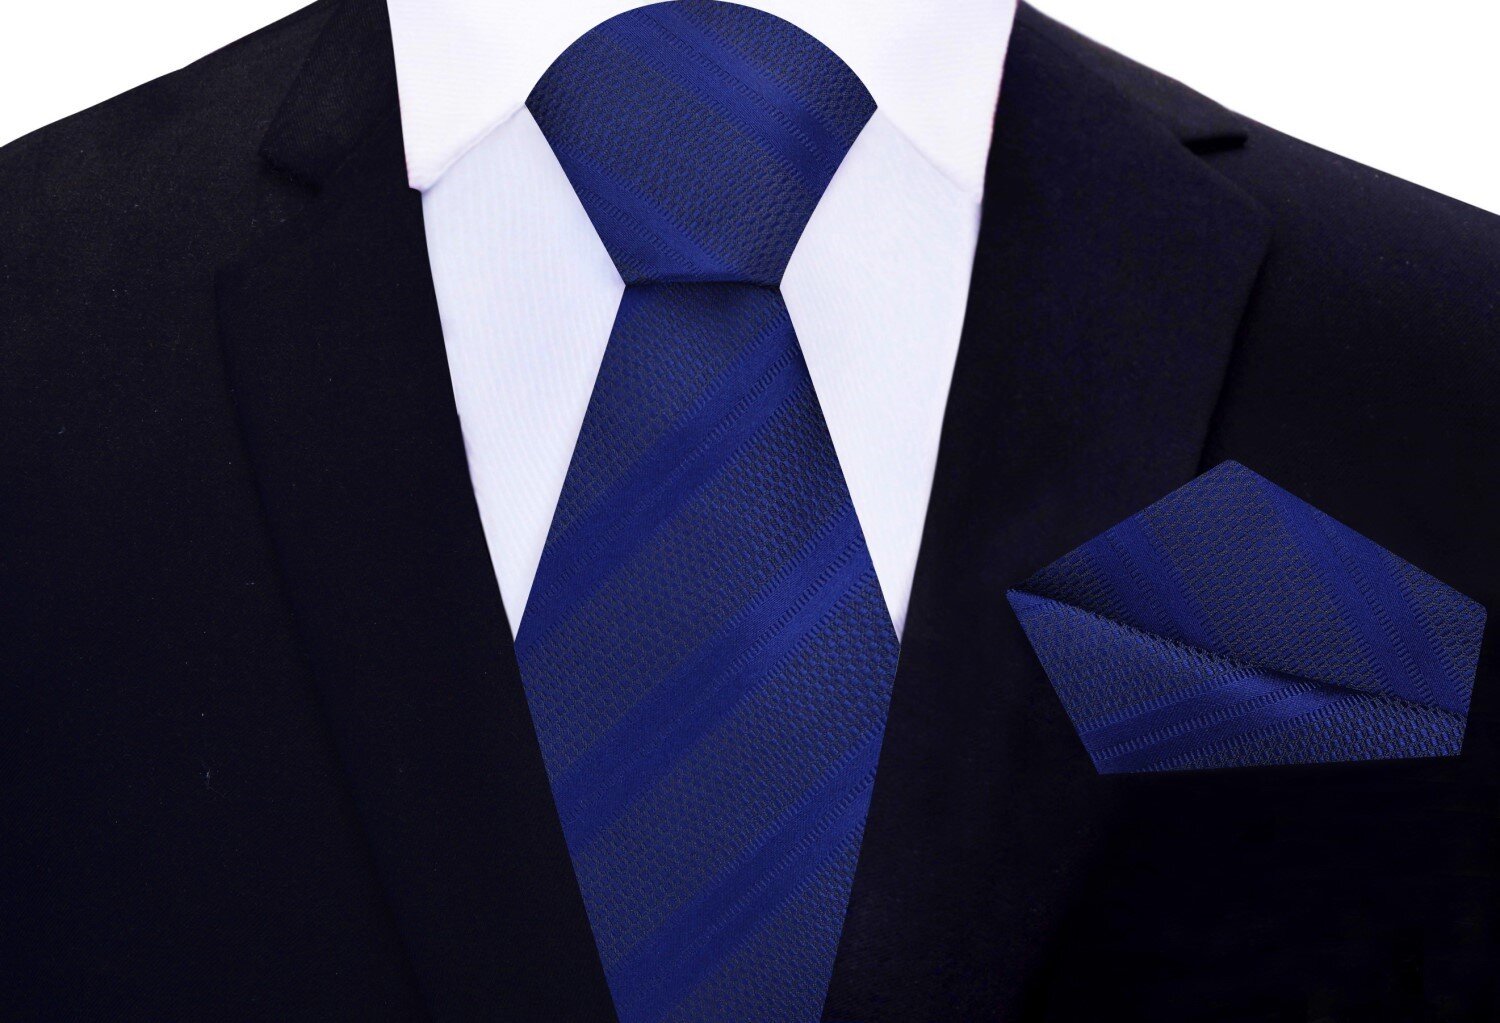 Main View: Shades of Dark Blue Stripe Tie and Pocket Square